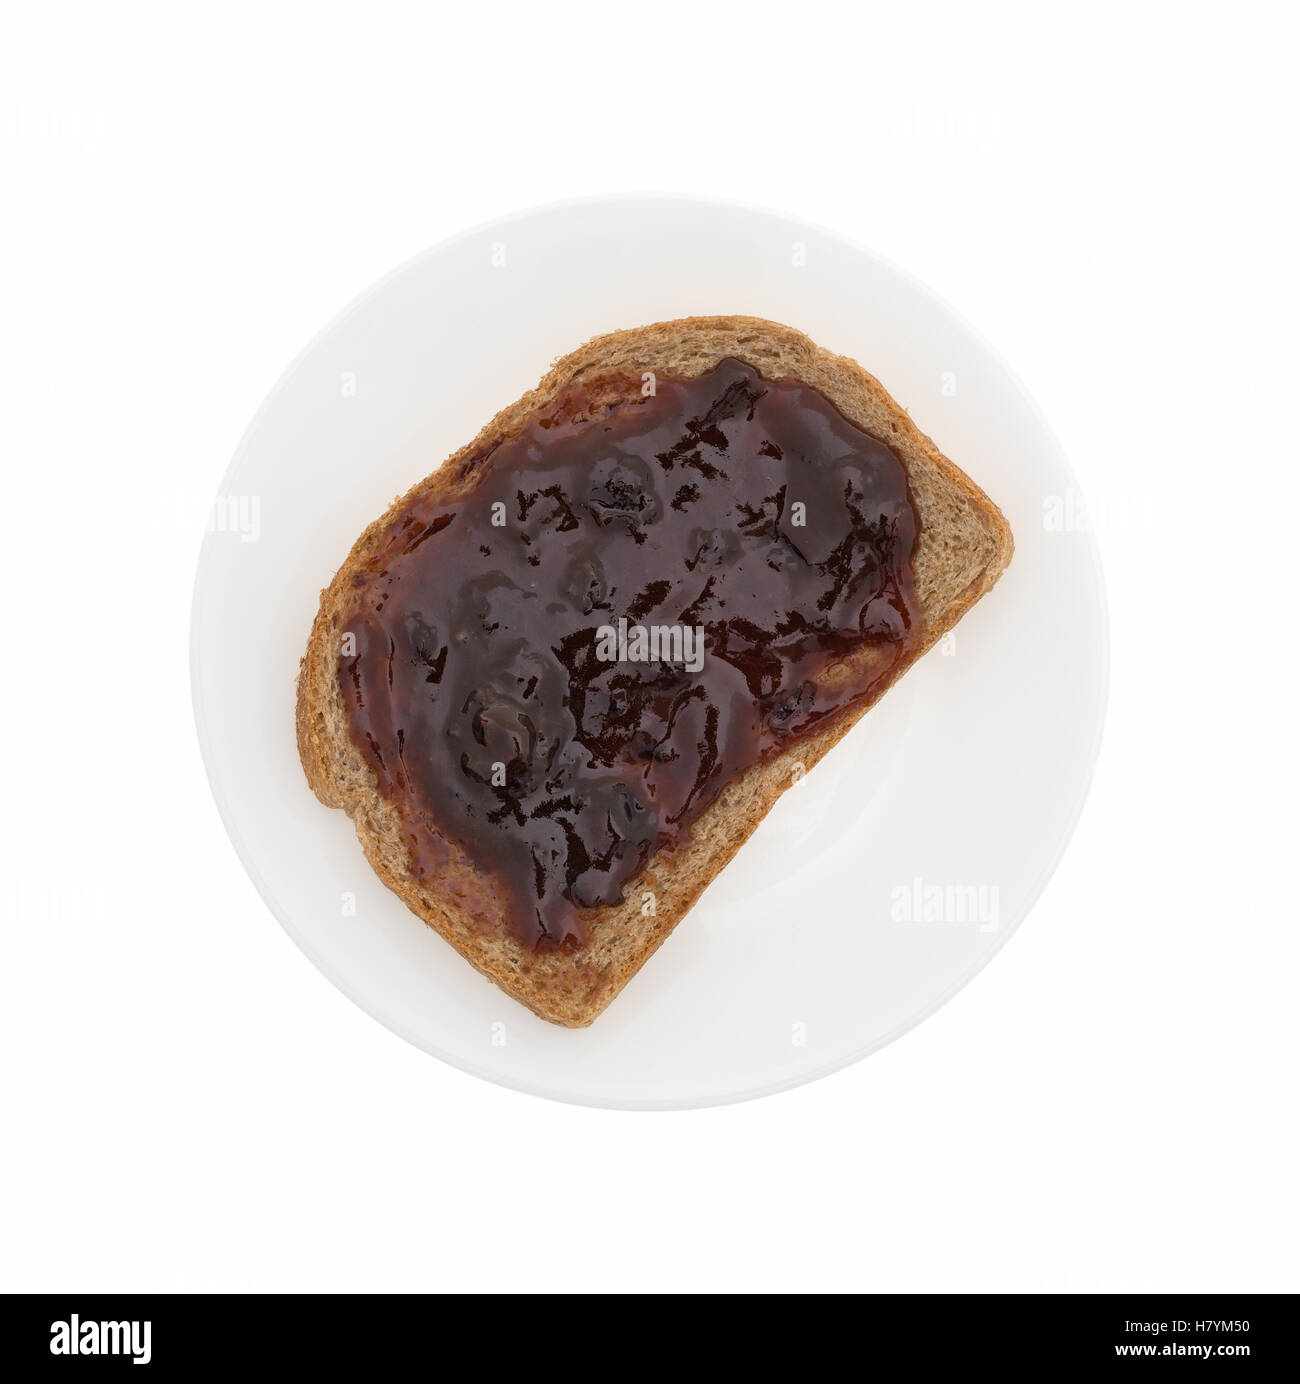 Top view of plum preserves spread on a piece of wheat bread on a plate isolated on a white background. Stock Photo